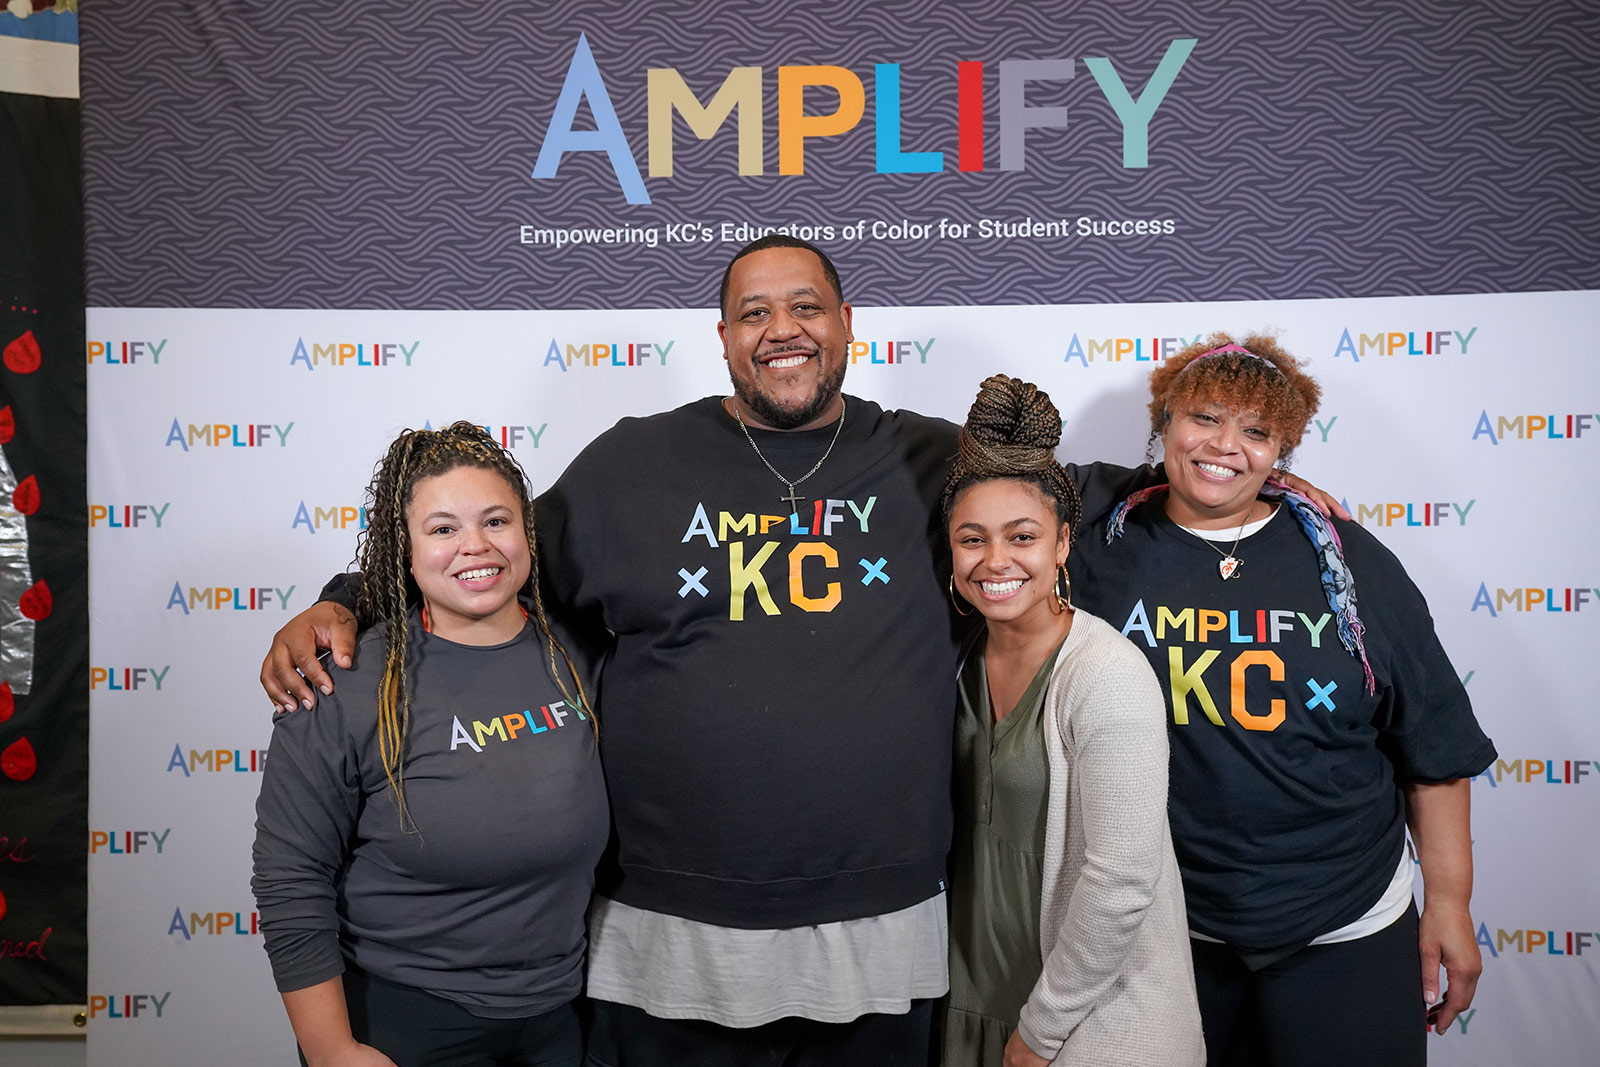 Amplify attendees pose in front of the Amplify Conference backdrop